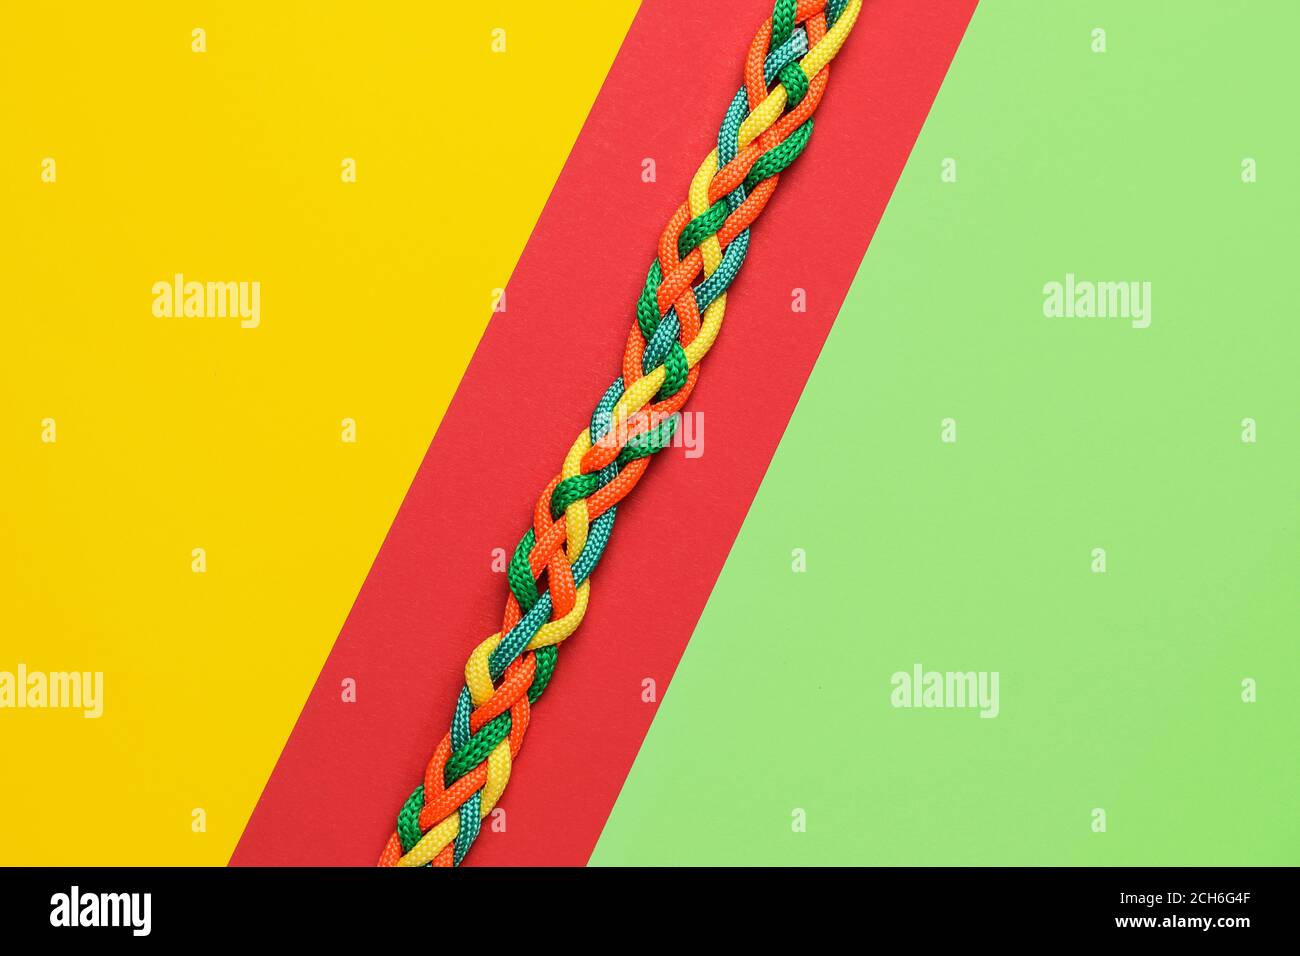 Lots Colorful Braided Strings View Stock Photo 1600888666